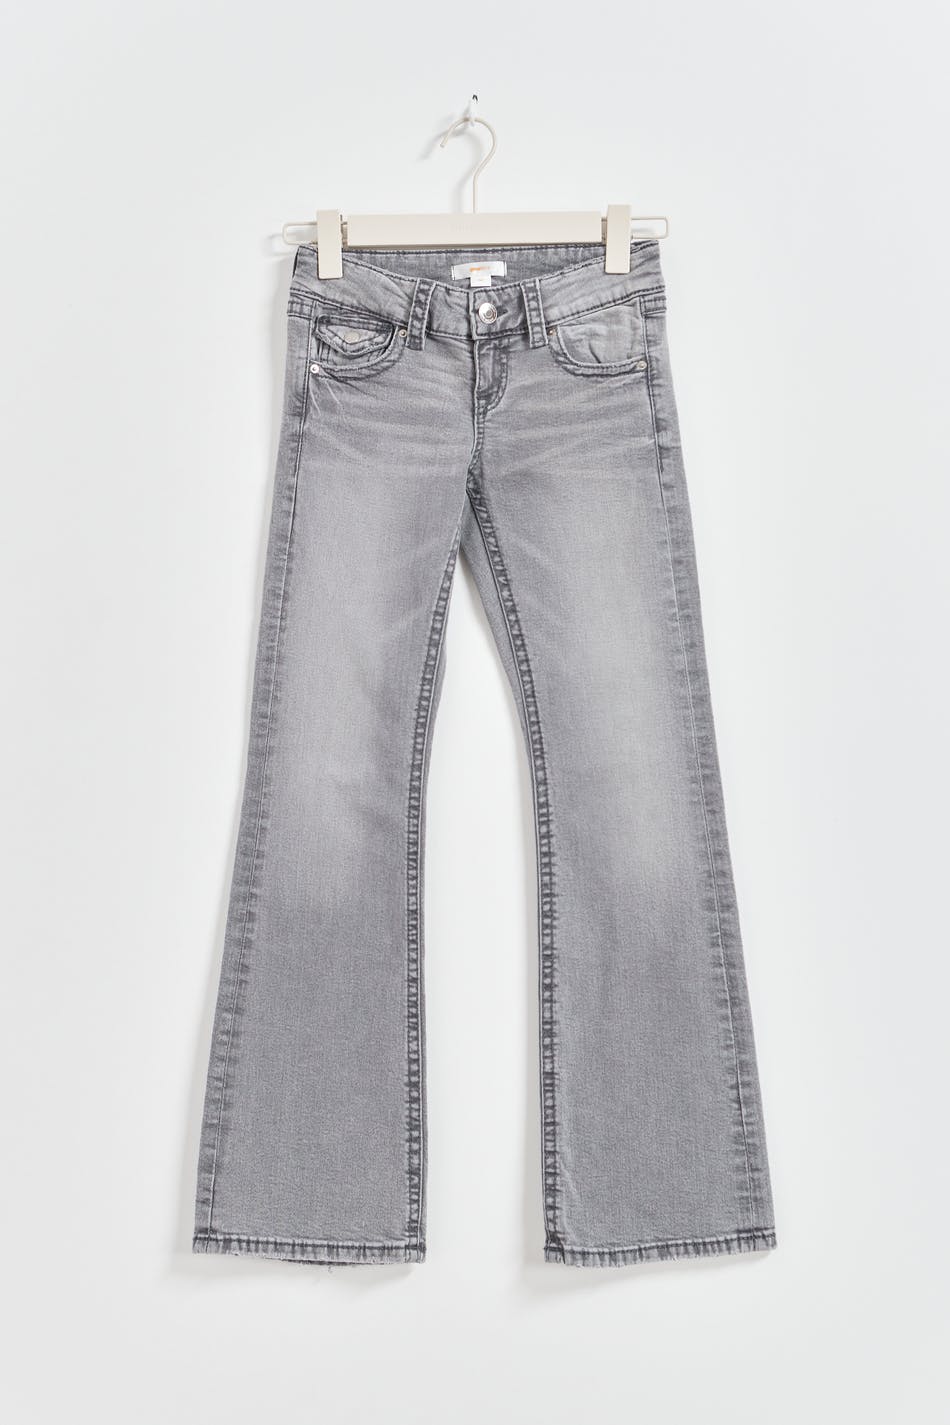 Gina Tricot - Chunky flare tall jeans - wide jeans - Grey - 164 - Female